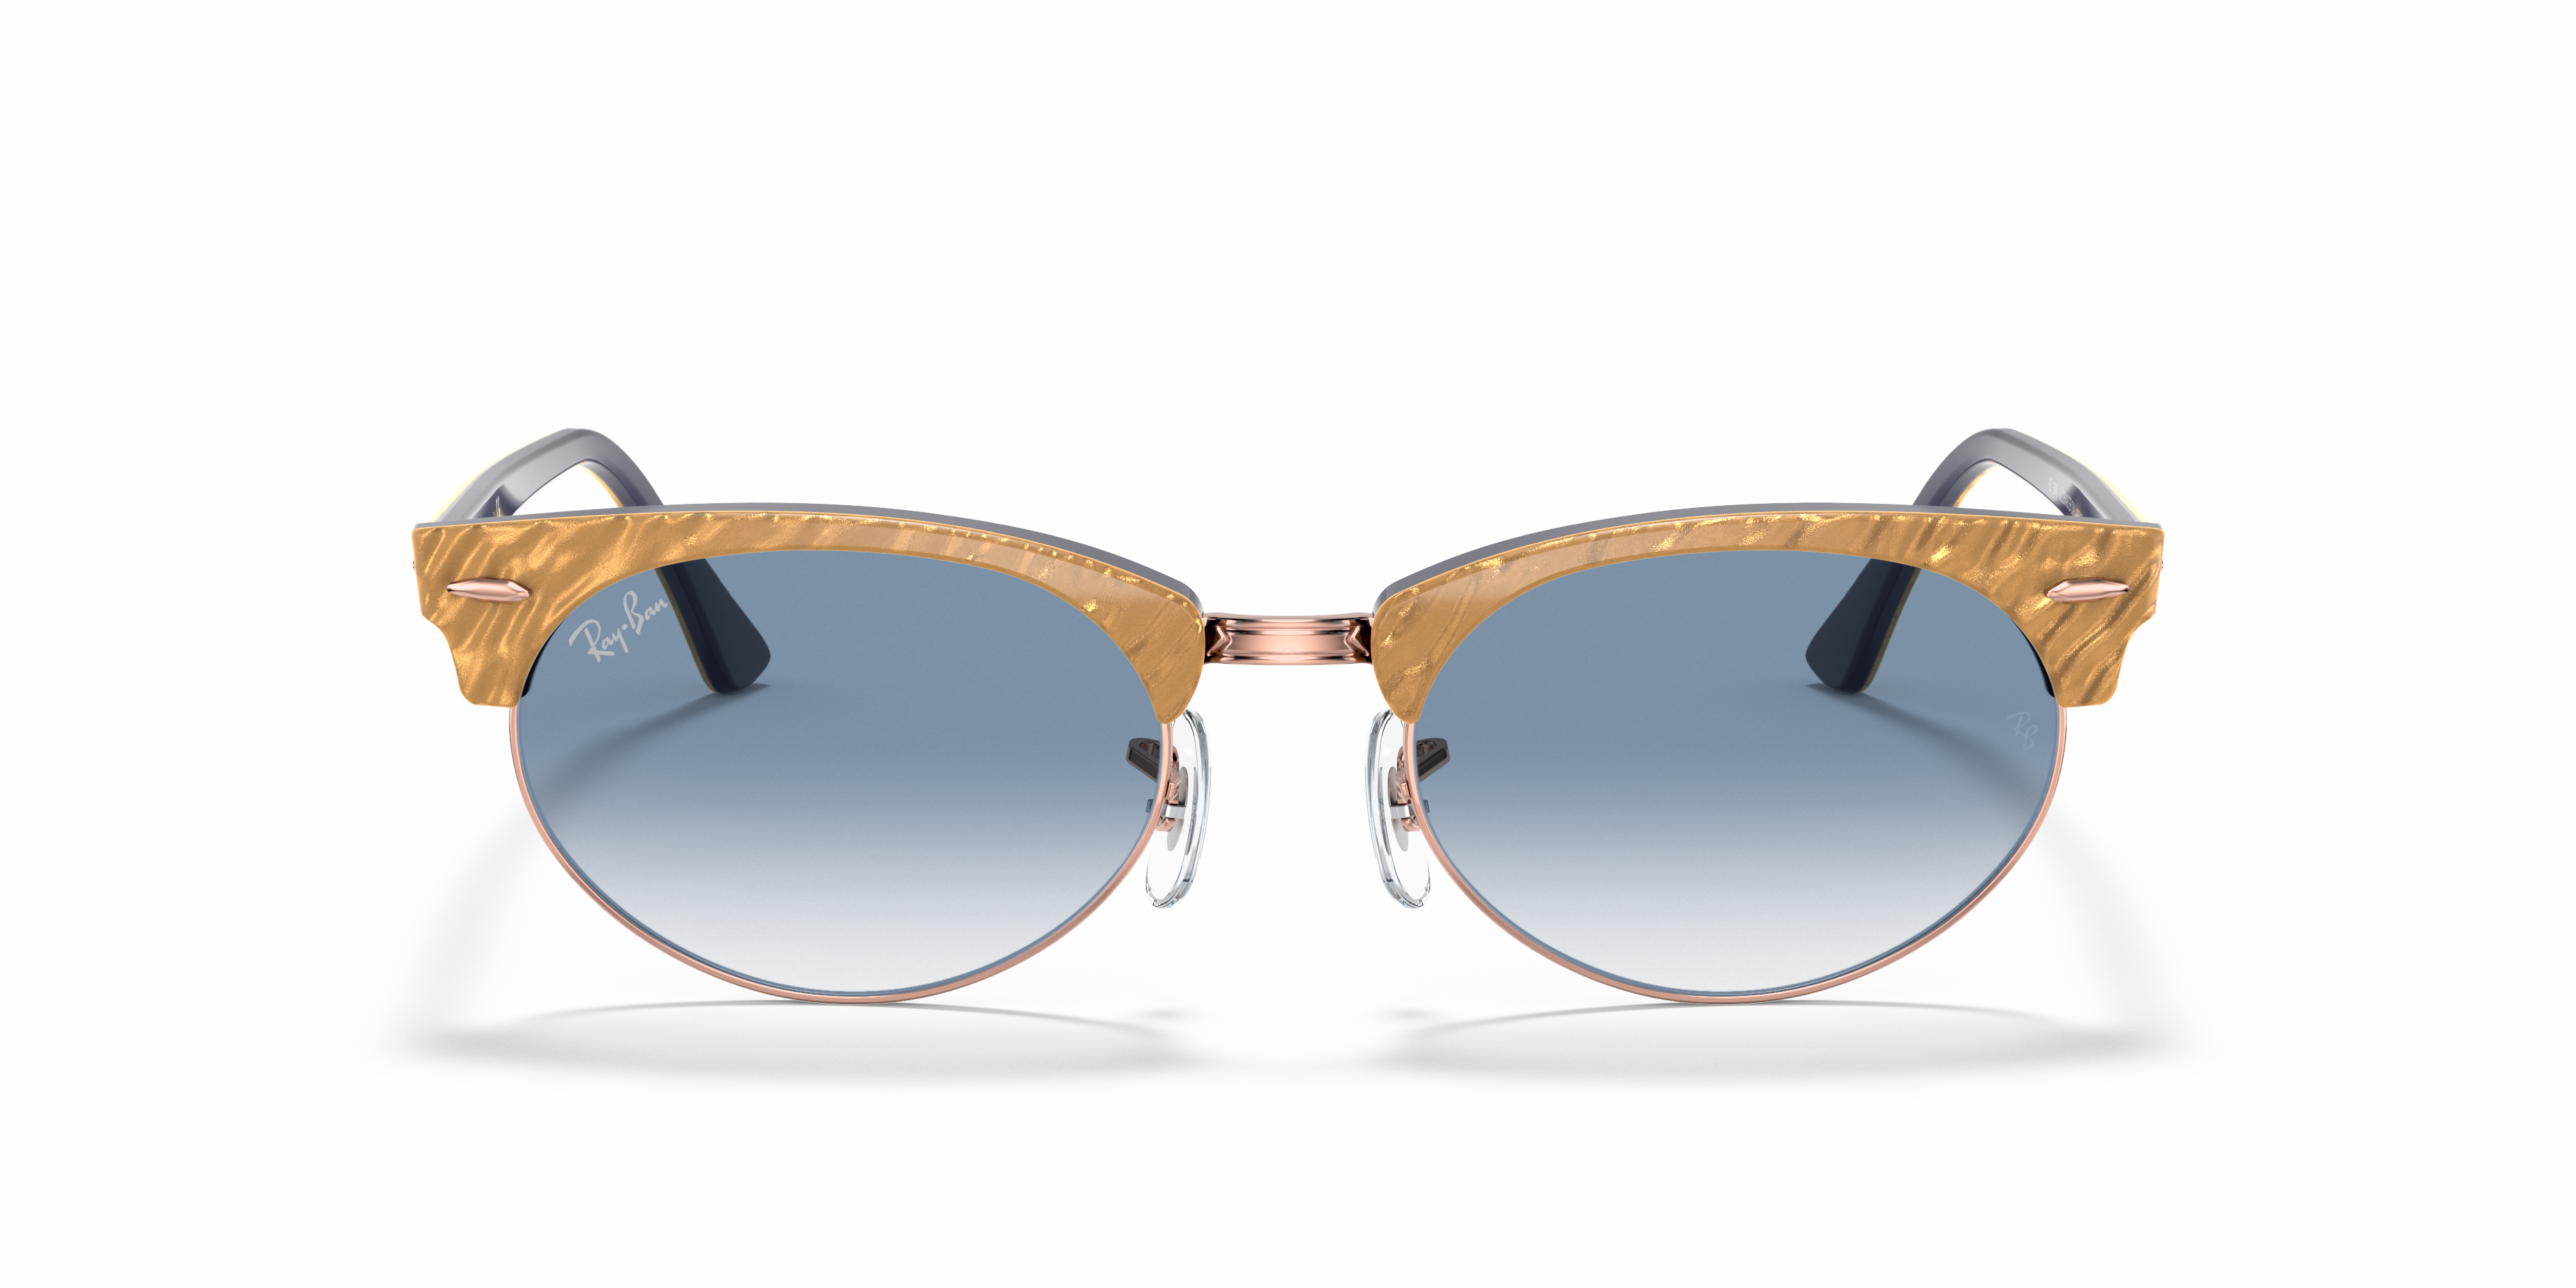 Clubmaster Oval Sunglasses in Beige and Light Blue | Ray-Ban®